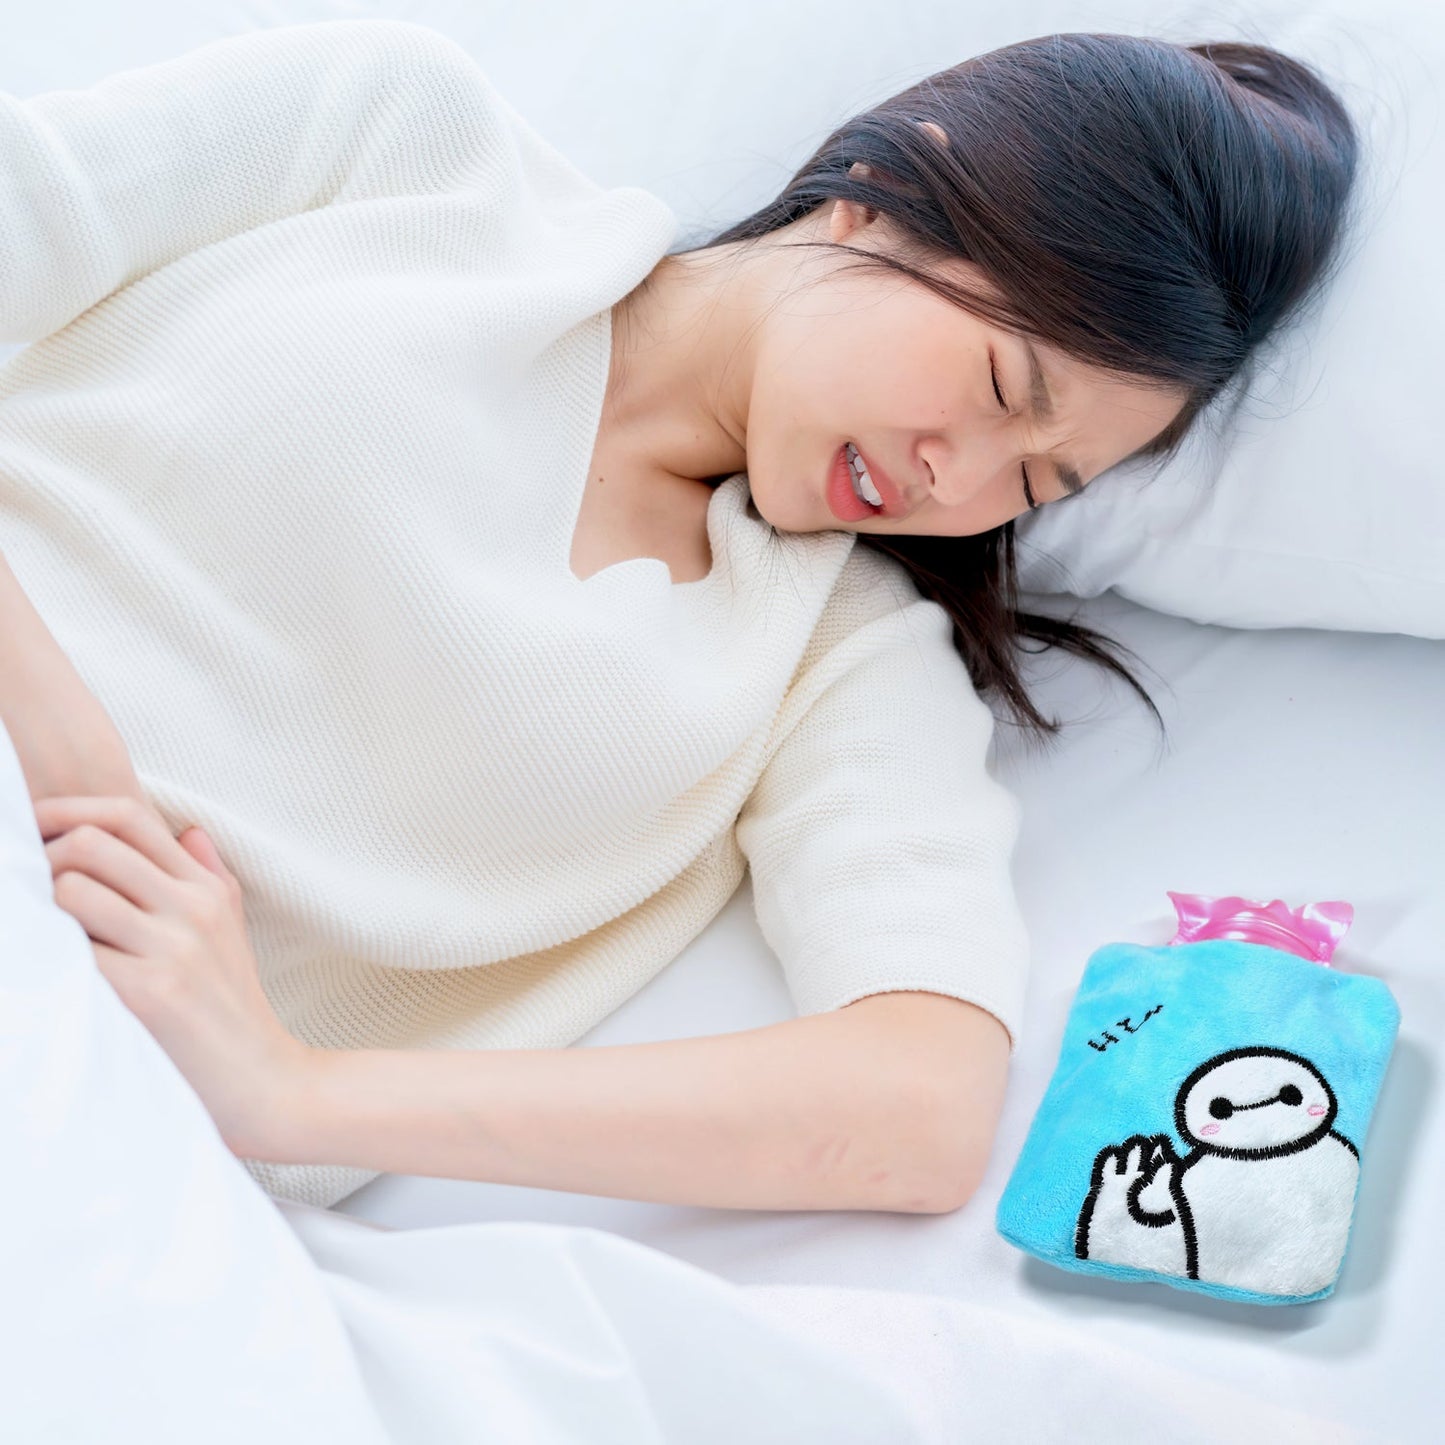 6525 Blue Baymax small Hot Water Bag with Cover for Pain Relief, Neck, Shoulder Pain and Hand, Feet Warmer, Menstrual Cramps. DeoDap